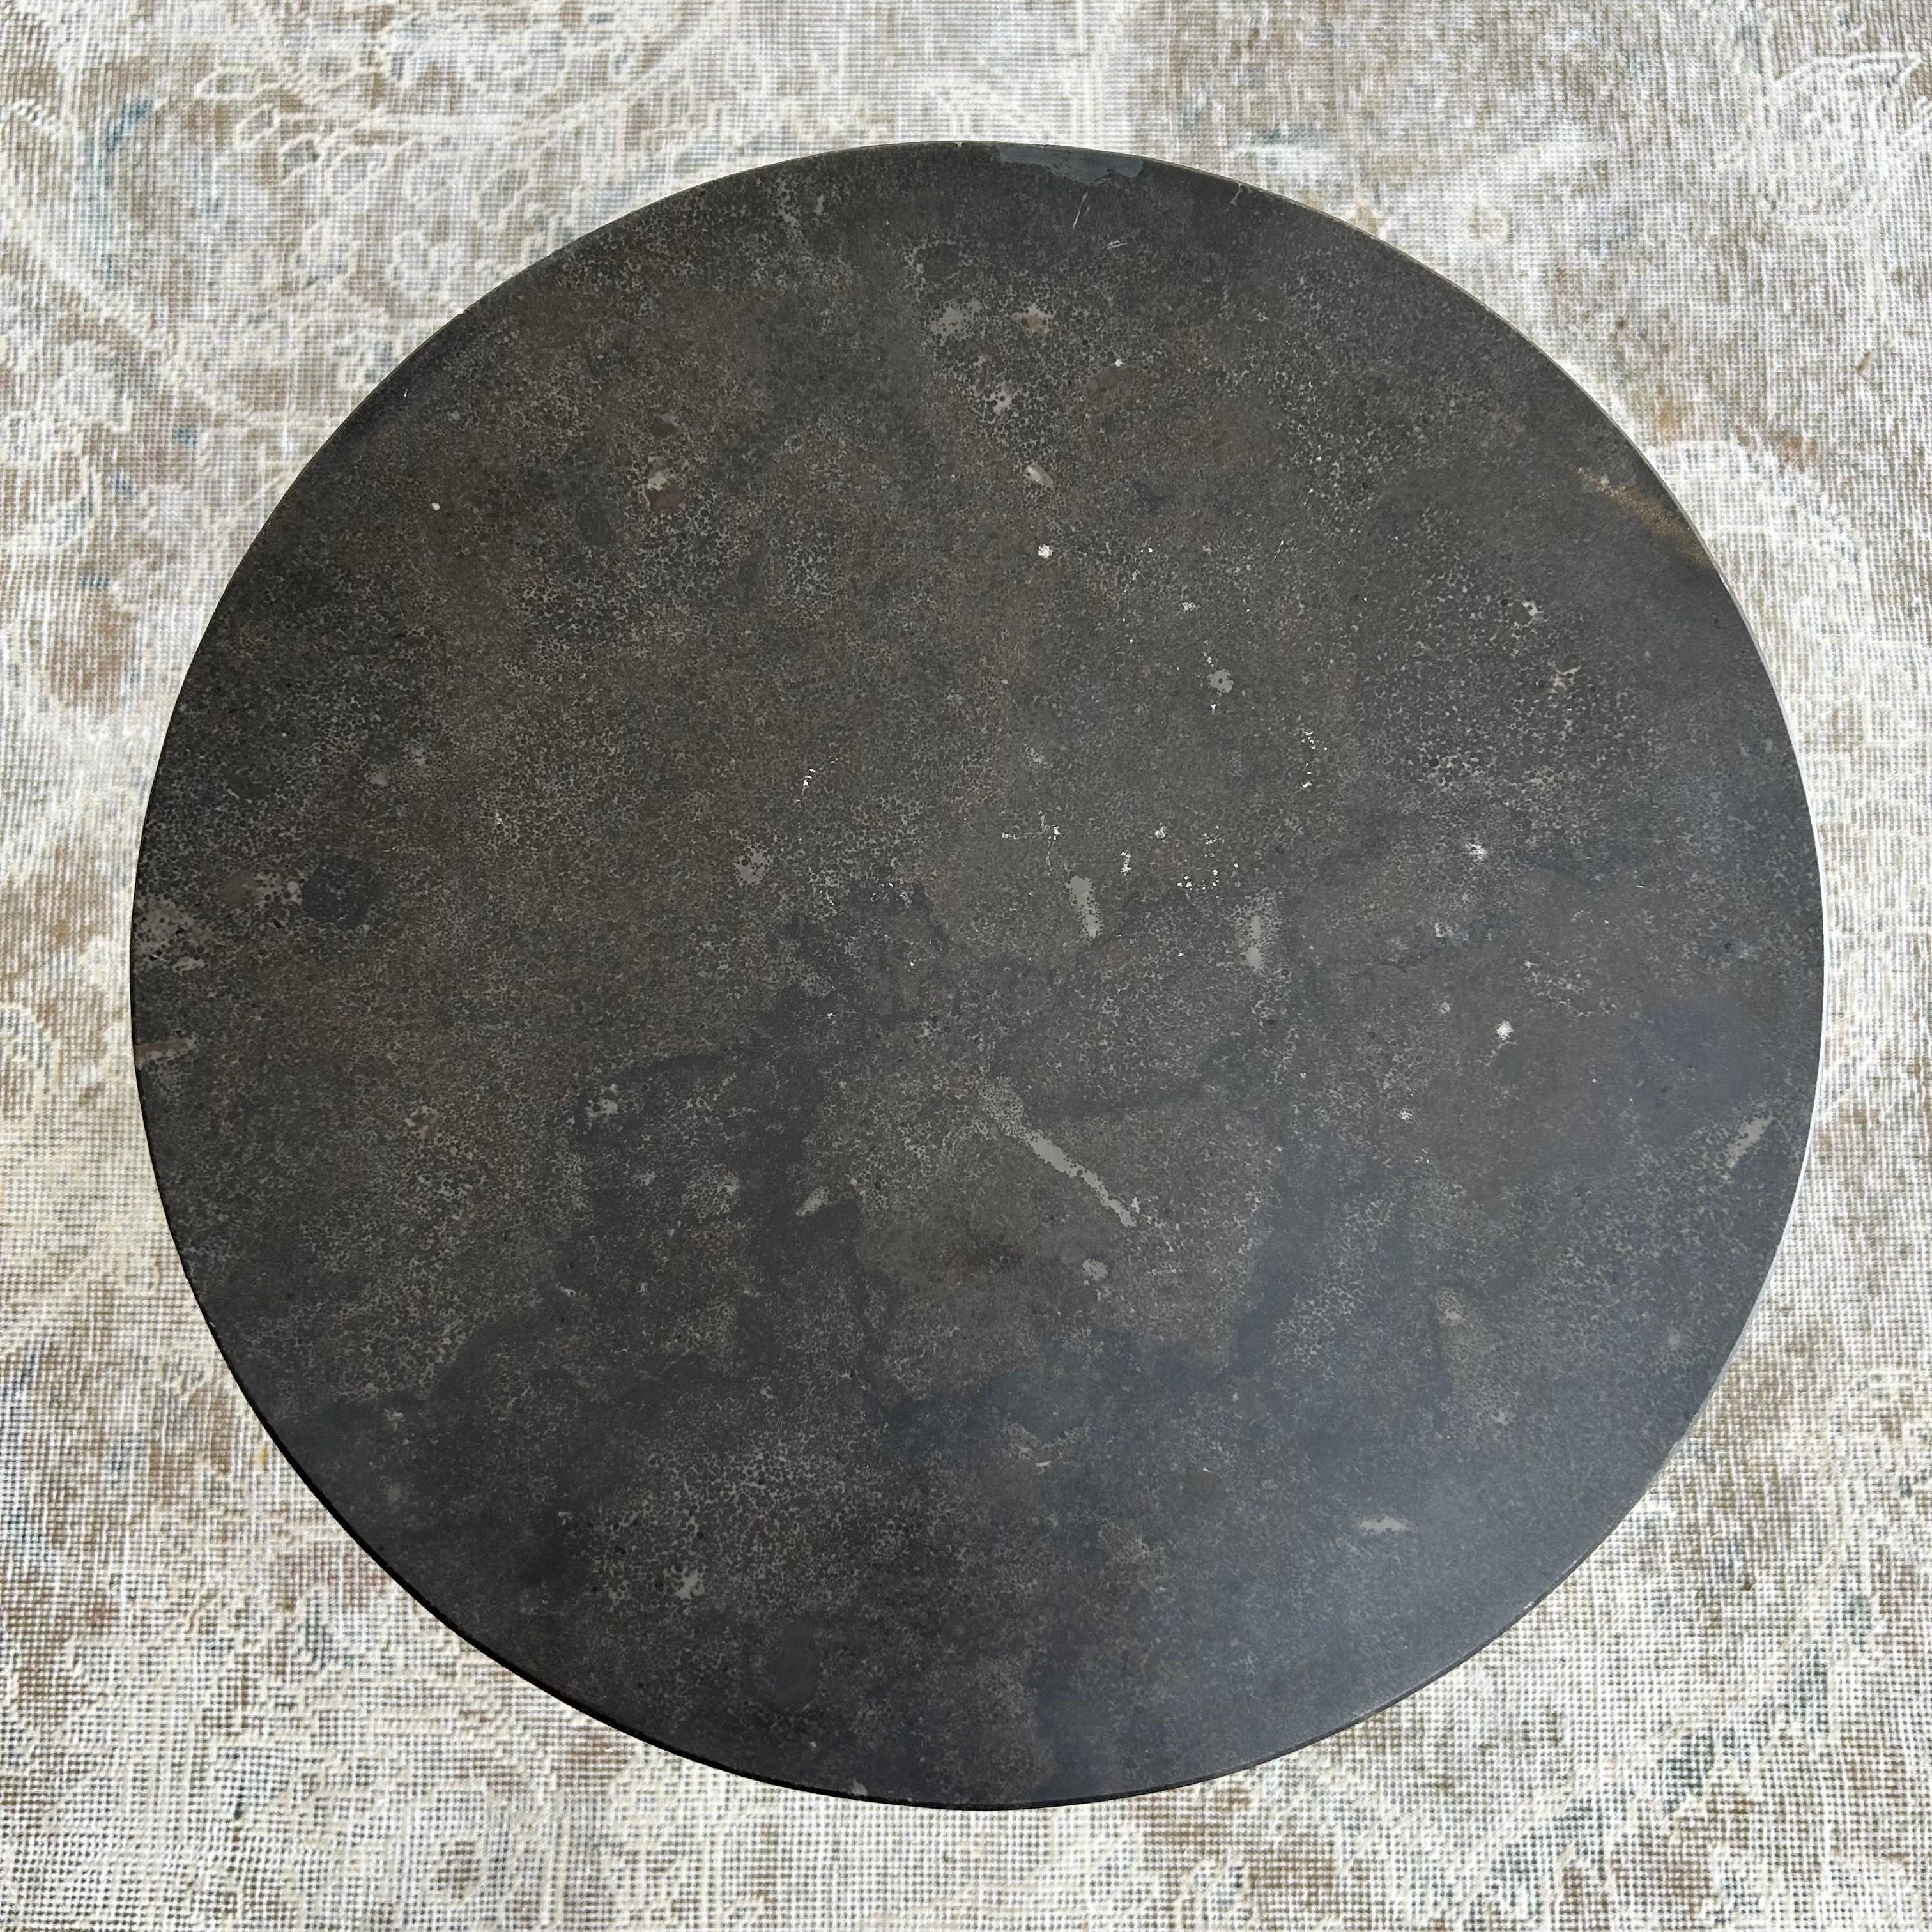 Modern side table in a washed charcoal color.
Material: bluestone.
Finish: washed black stone finish.
width: 14 in
depth: 14 in
height: 19 in
weight: 78 lbs
this item can not ship by UPS due to it weight. Pick up or freight carrier only.
Each table